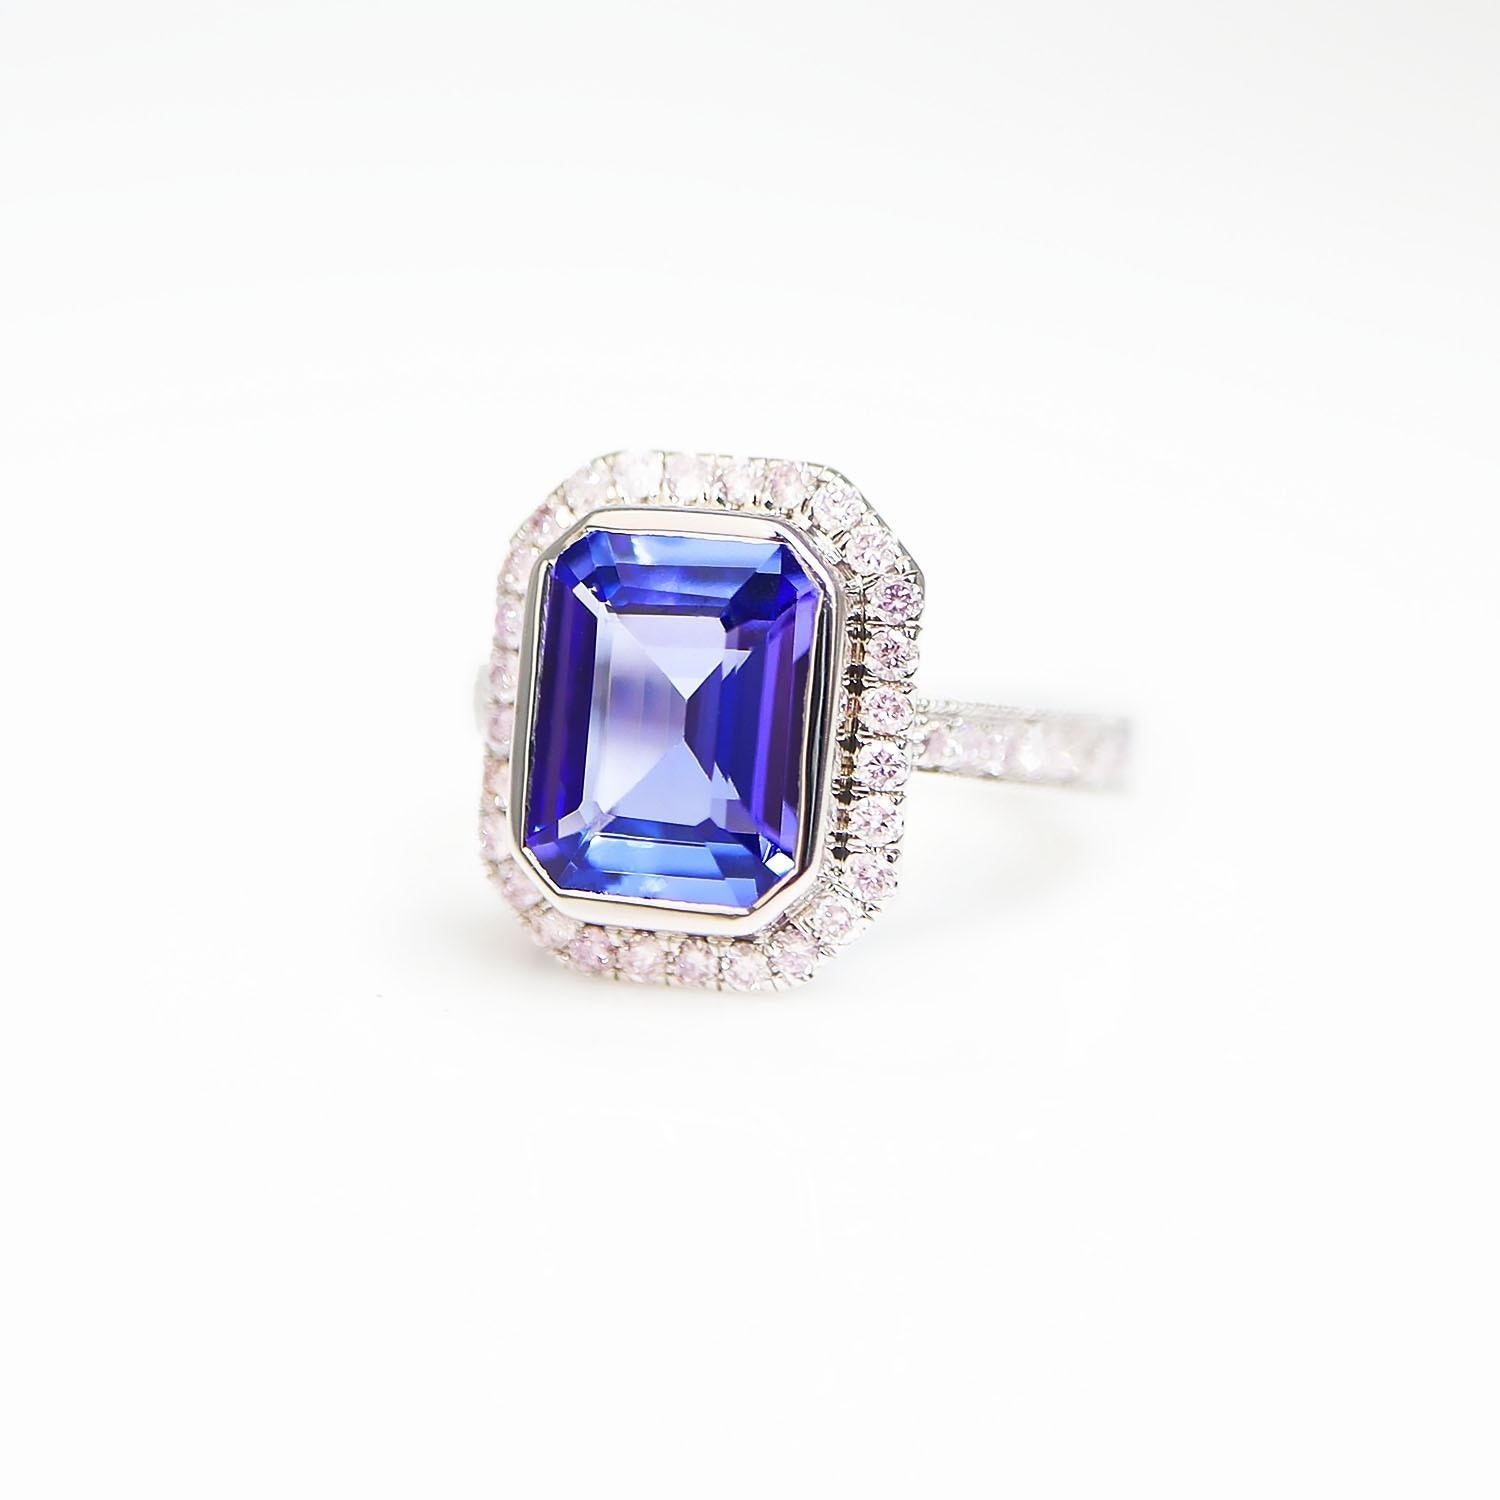 IGI 14K 2.50 ct Tanzanite&Pink Diamond Antique Art Deco Engagement Ring In New Condition For Sale In Kaohsiung City, TW